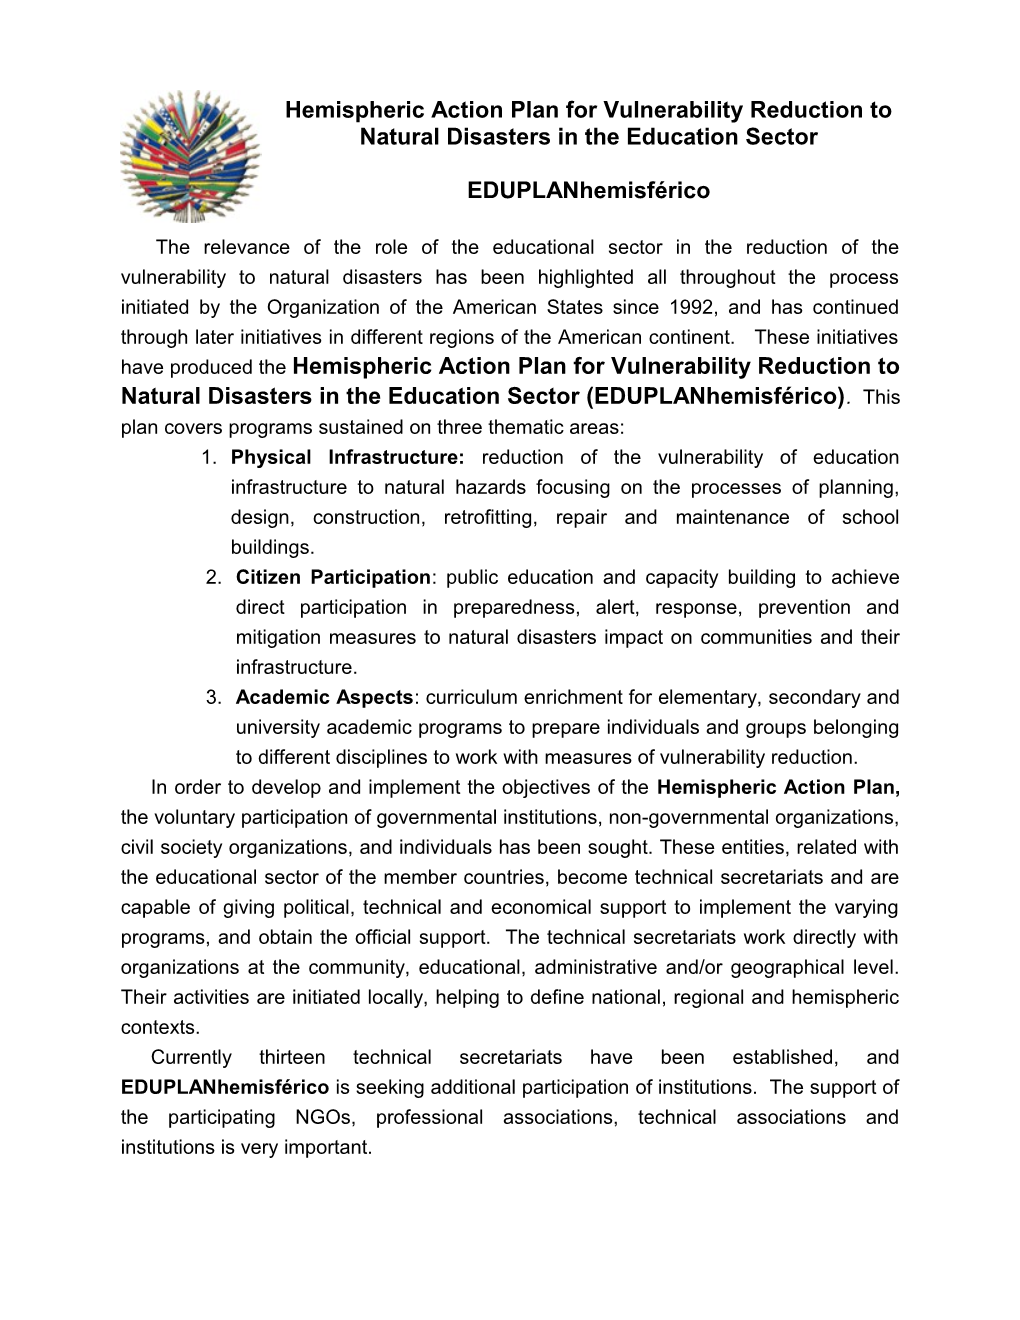 Hemispheric Action Plan for Vulnerability Reduction to Natural Disasters in the Education